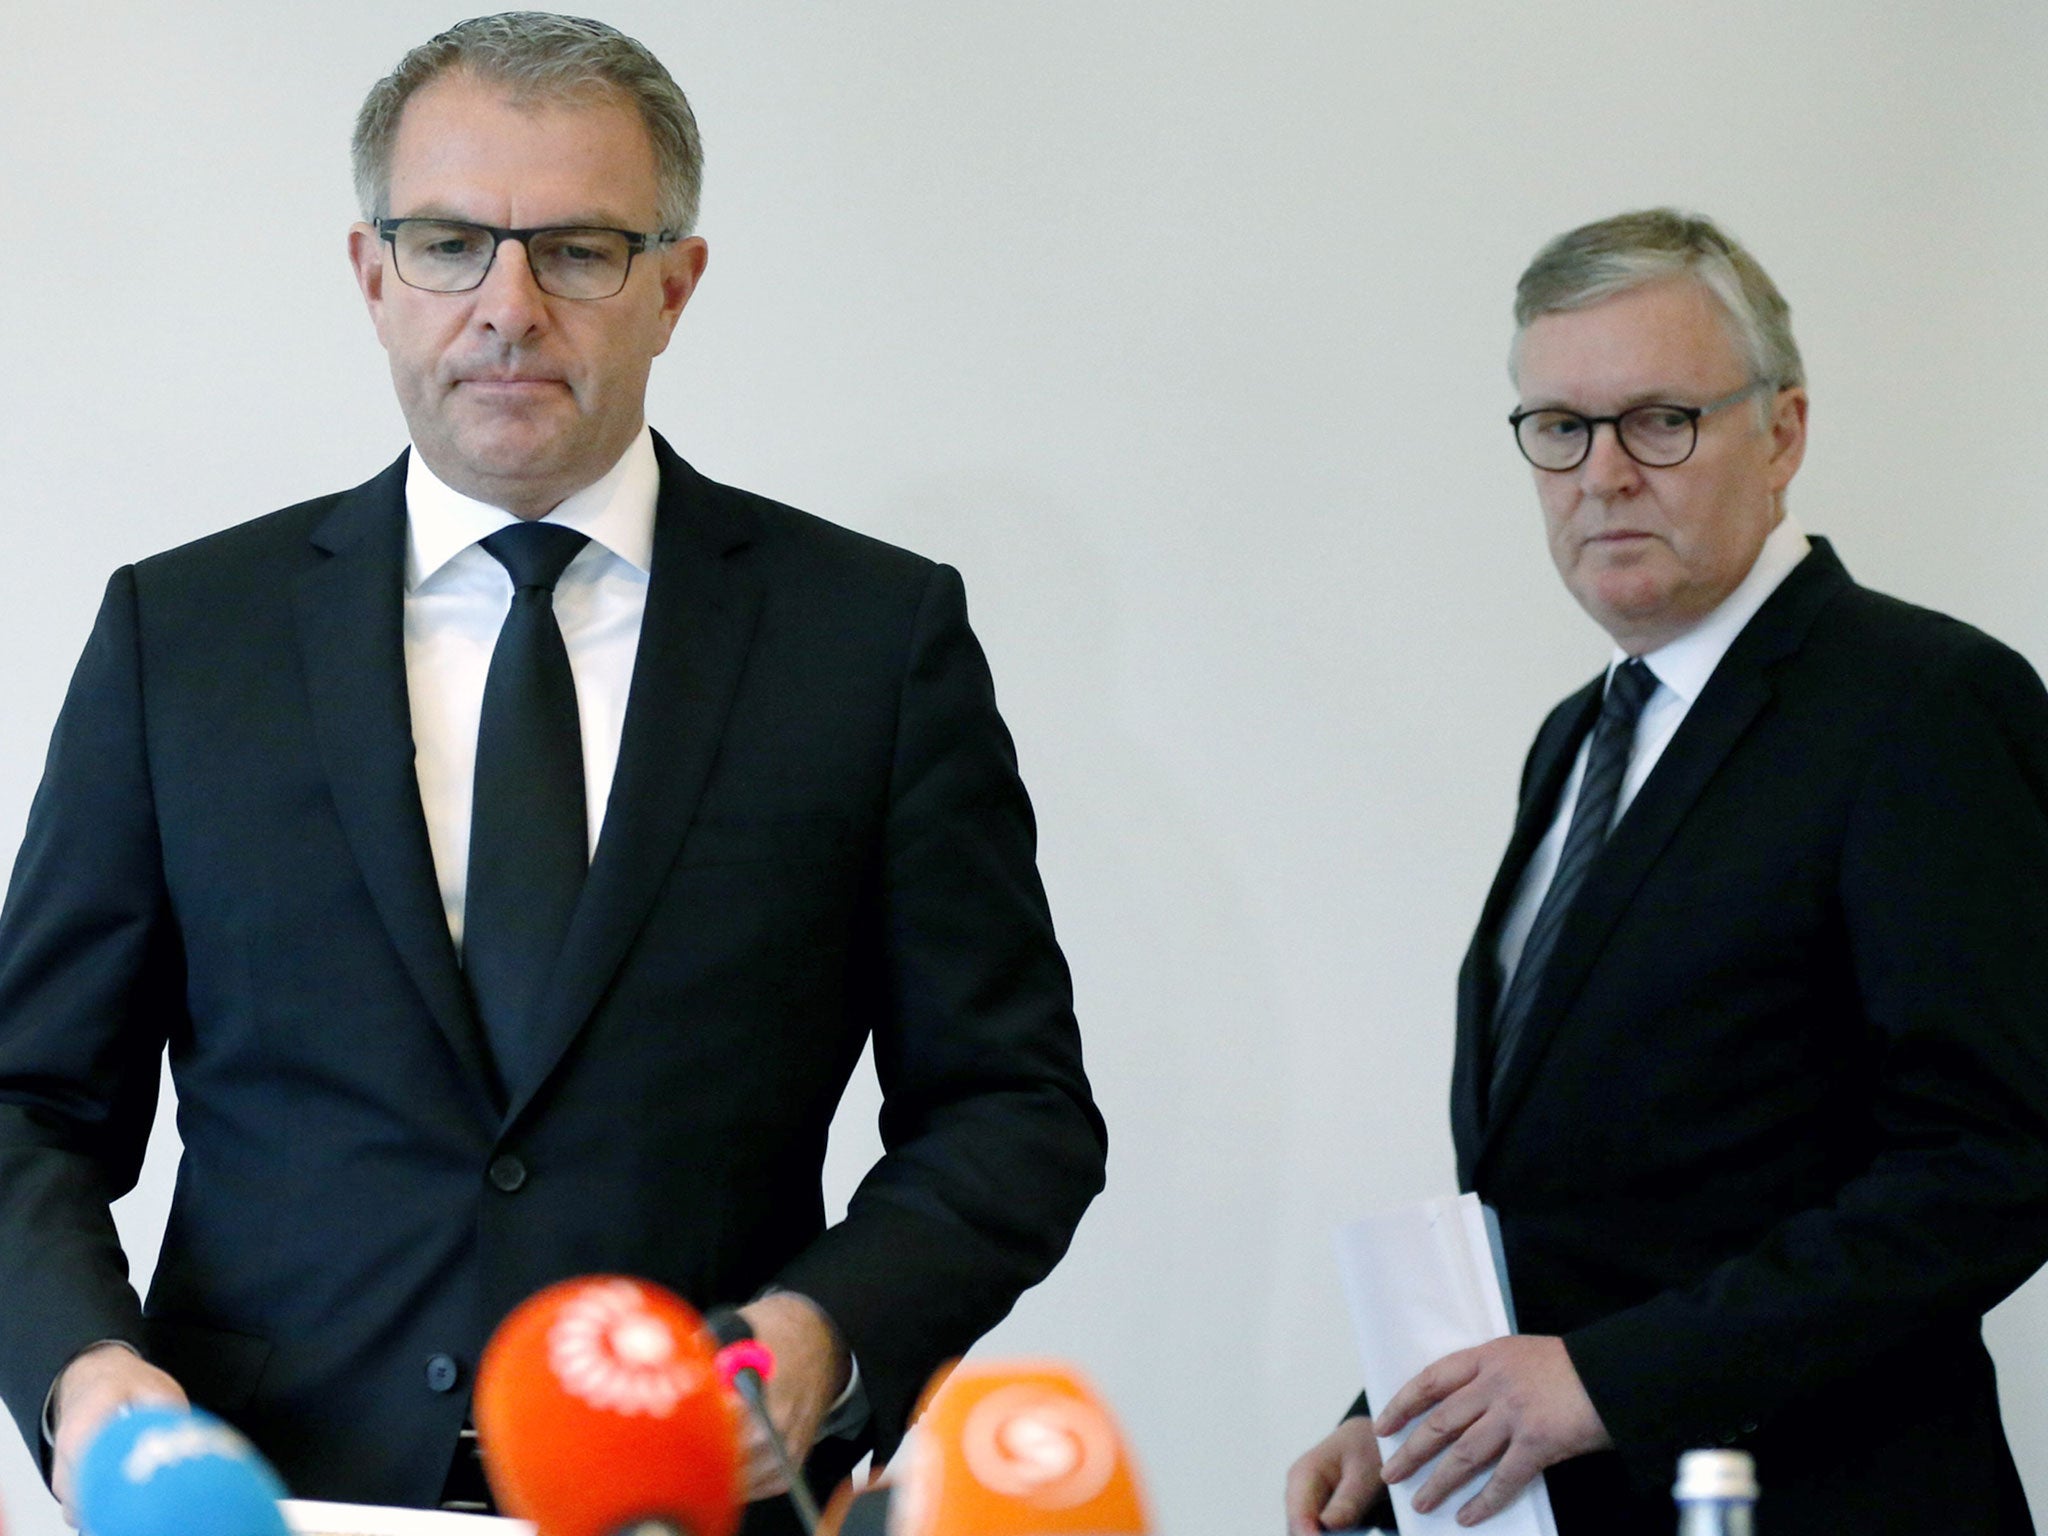 Lufthansa CEO Carsten Spohr, left, and Germanwings CEO Thomas Winkelmann arrive for a press conference near the Germanwings headquarters in Cologne, Germany